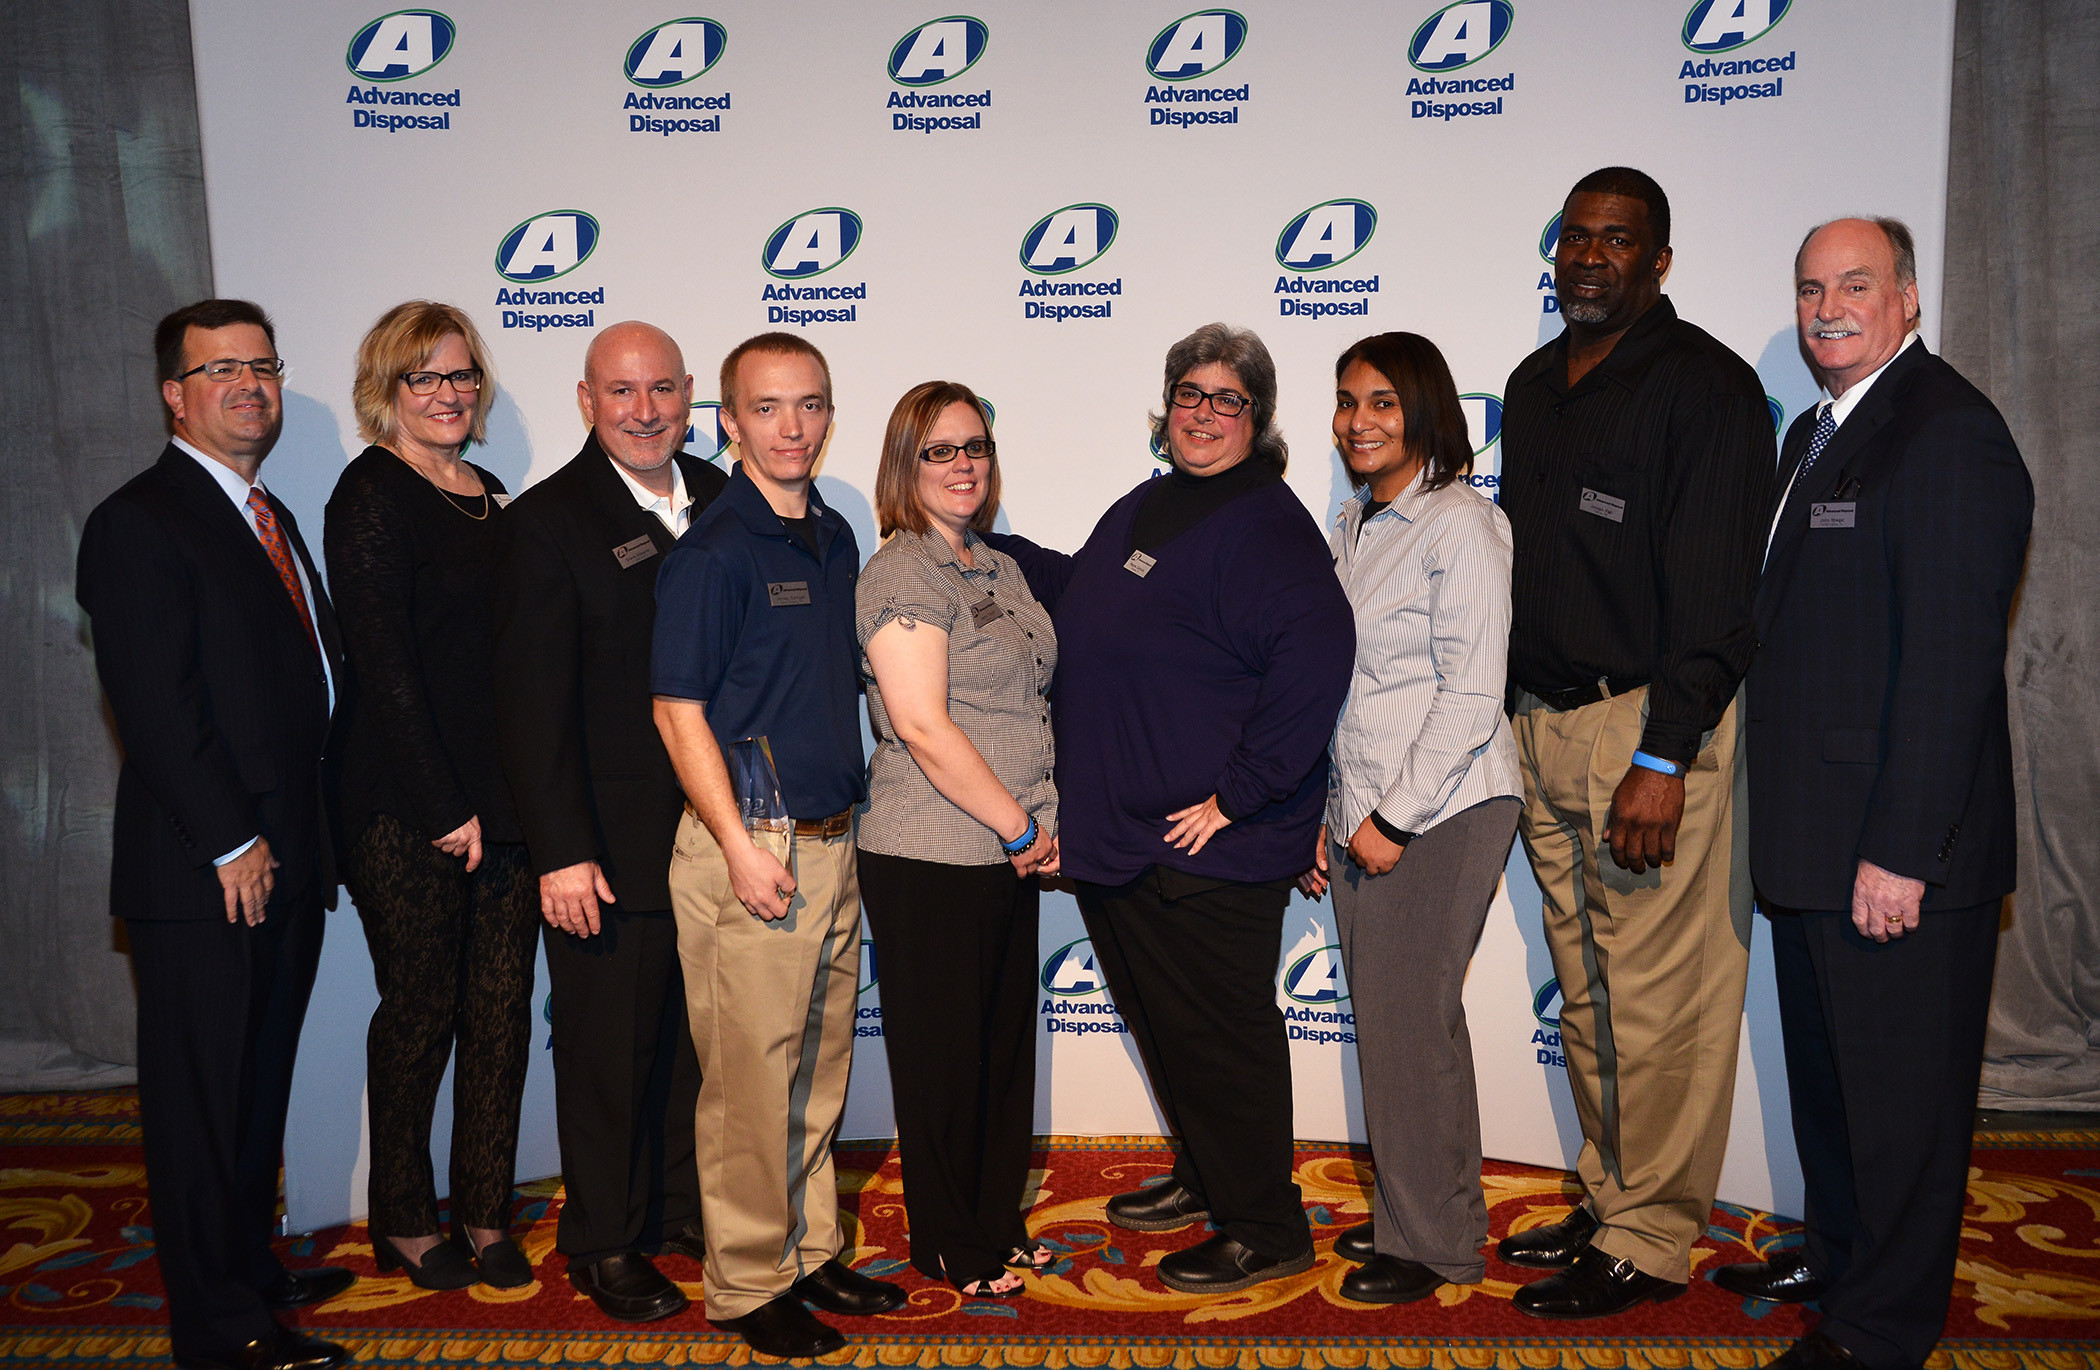 From left: Advanced Disposal’s Richard Burke, CEO; Lori Lamb, Trash Talker of the Year; Steve Edwards, Municipal Marketer of the Year; Harvey Corrigan, Good Samaritan of the Year; Jenny Taylor, Admin./Clerical I Employee of the Year;  Regina Caronia, CEO’s Award;  Alverda Galon, Admin./Clerical II Employee of the Year;  Joseph Fail, Operations Employee of the Year; and John Spegal, COO.